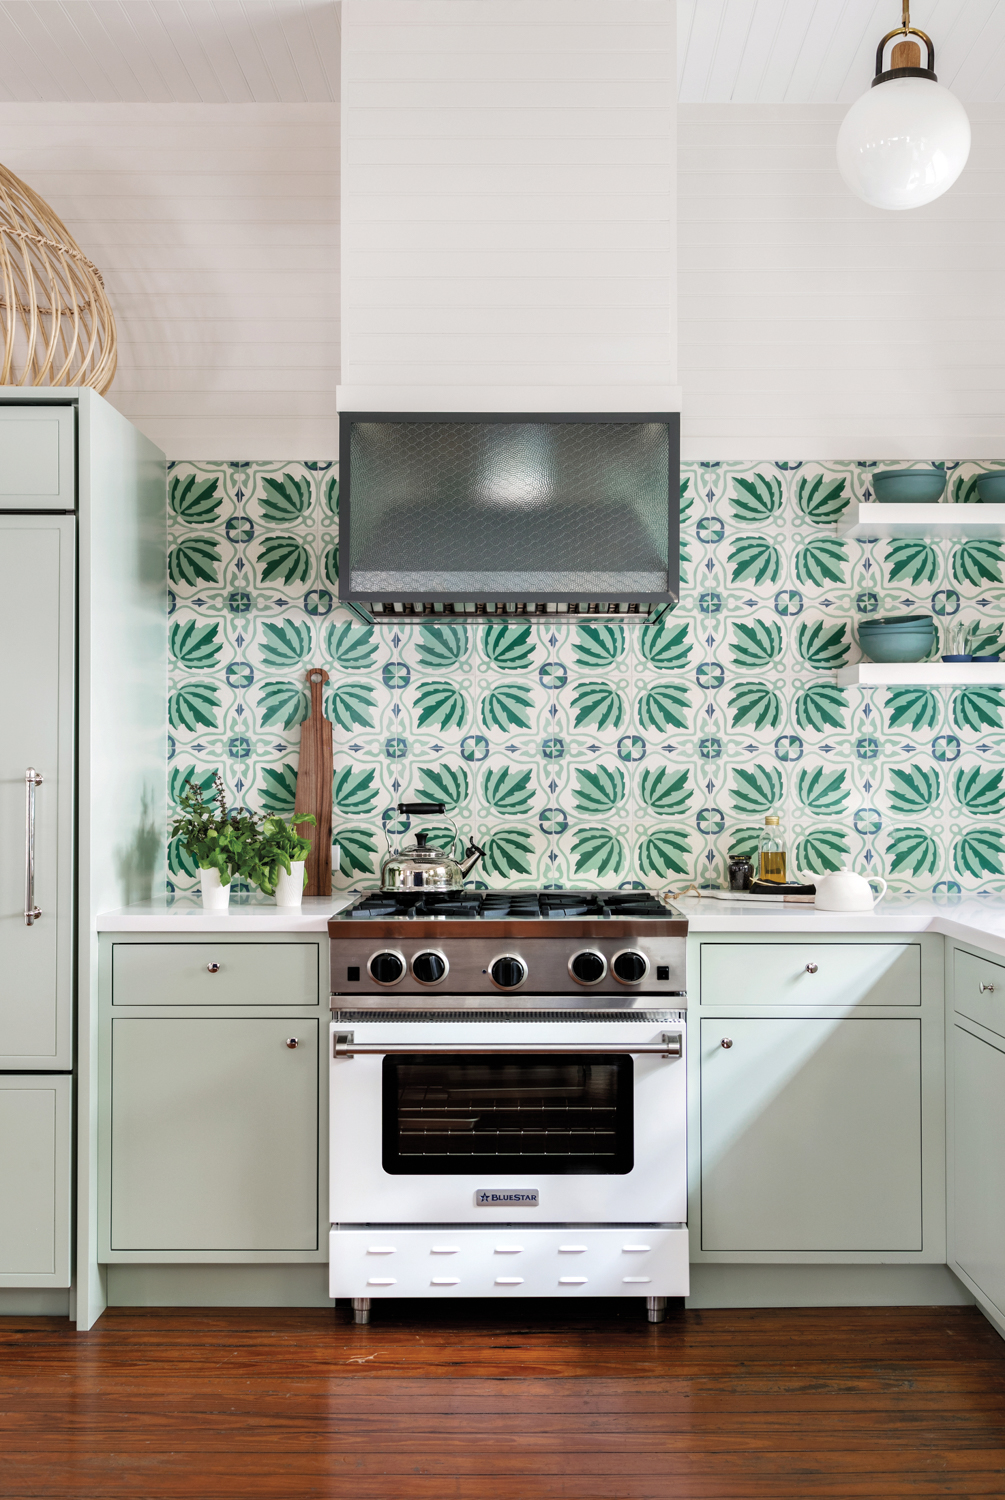 Kitchen with dark wood floors and green-patterned backsplash and mint lower cabinets